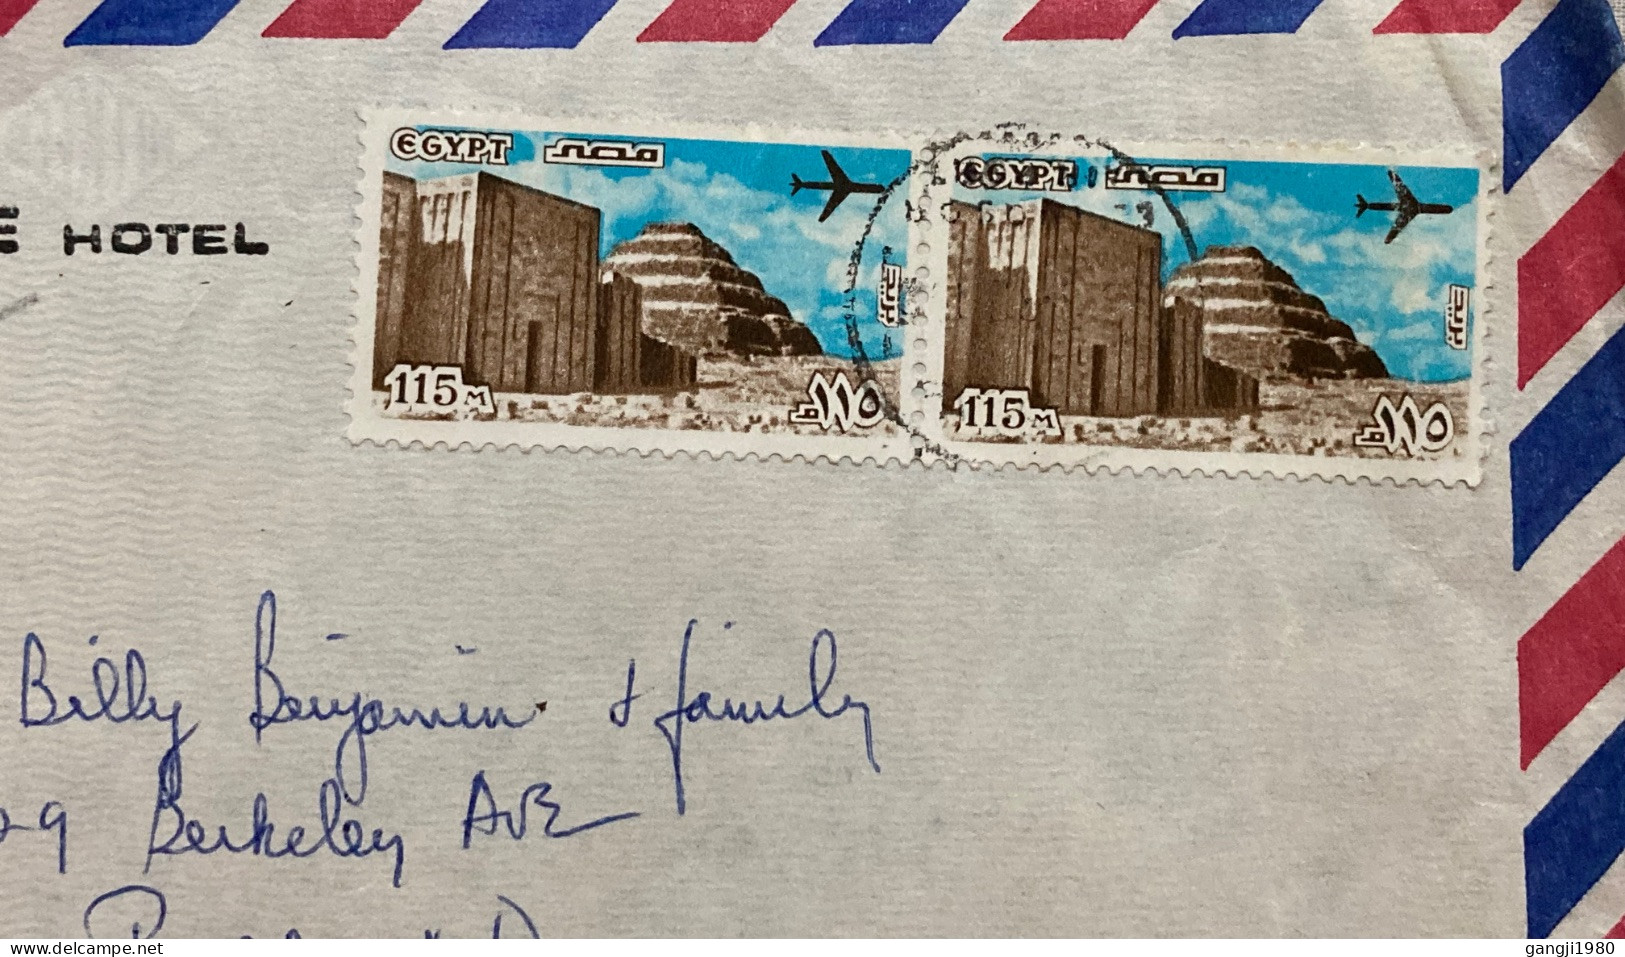 EGYPT 1980, COVER USED TO USA, NEW WINTER PALACE HOTEL, LUXOR, 2 STAMP, PYRAMID, AEROPLANE, ARCHELOGY, BUILDING, HERITAG - Lettres & Documents